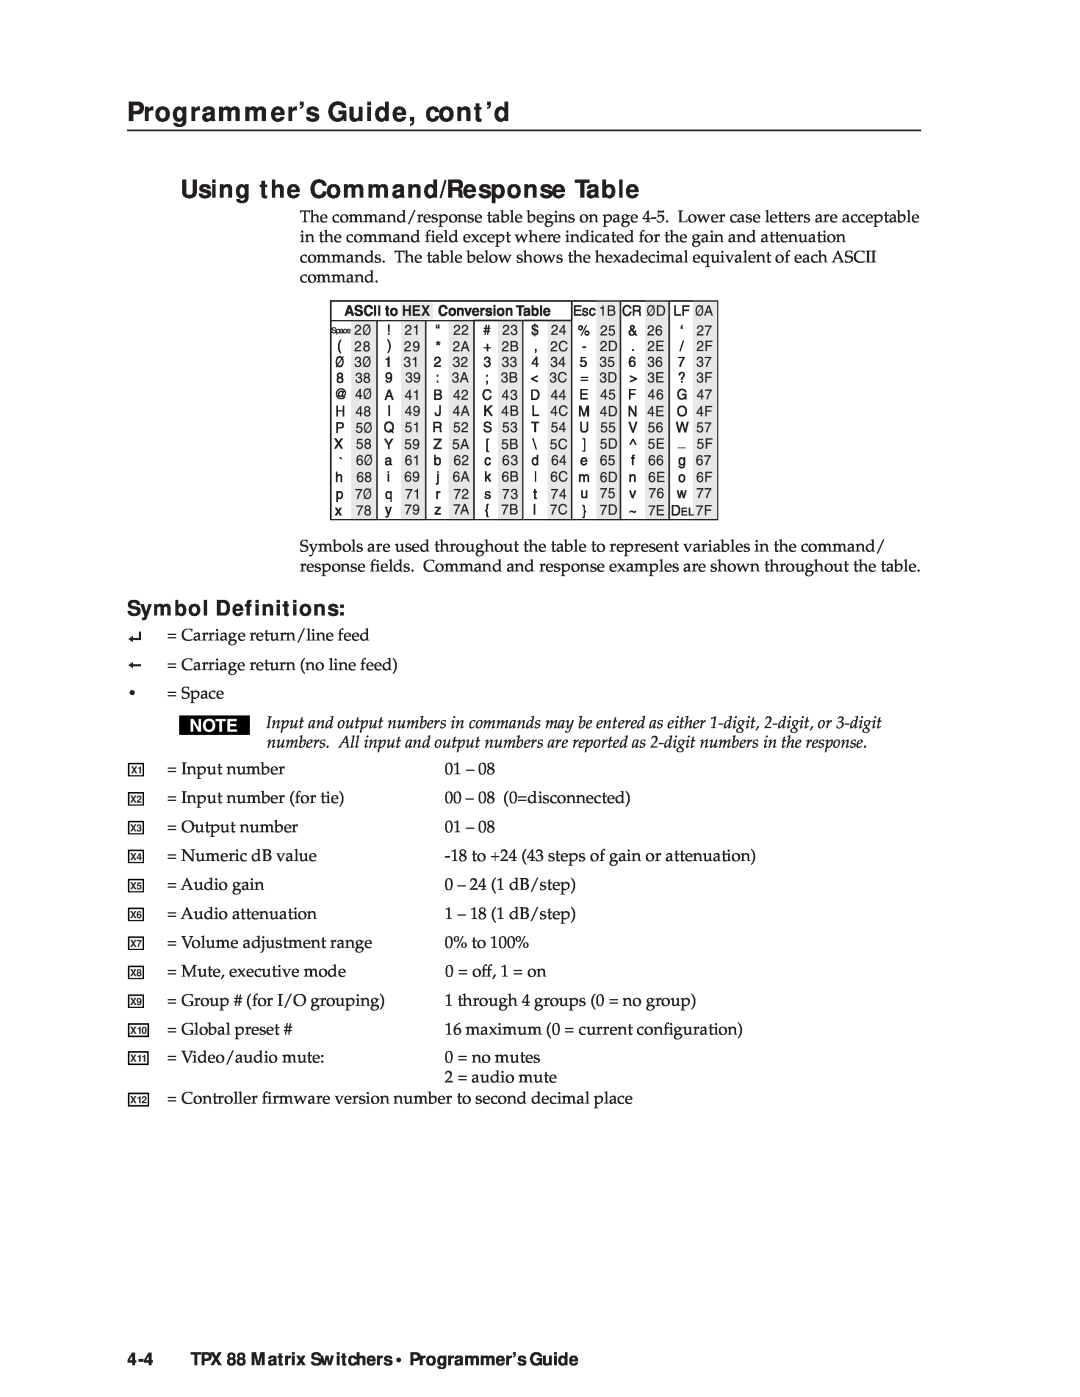 Extron electronic TPX 88 A manual Programmer’s Guide, cont’d, Using the Command/Response Table, Symbol Definitions 